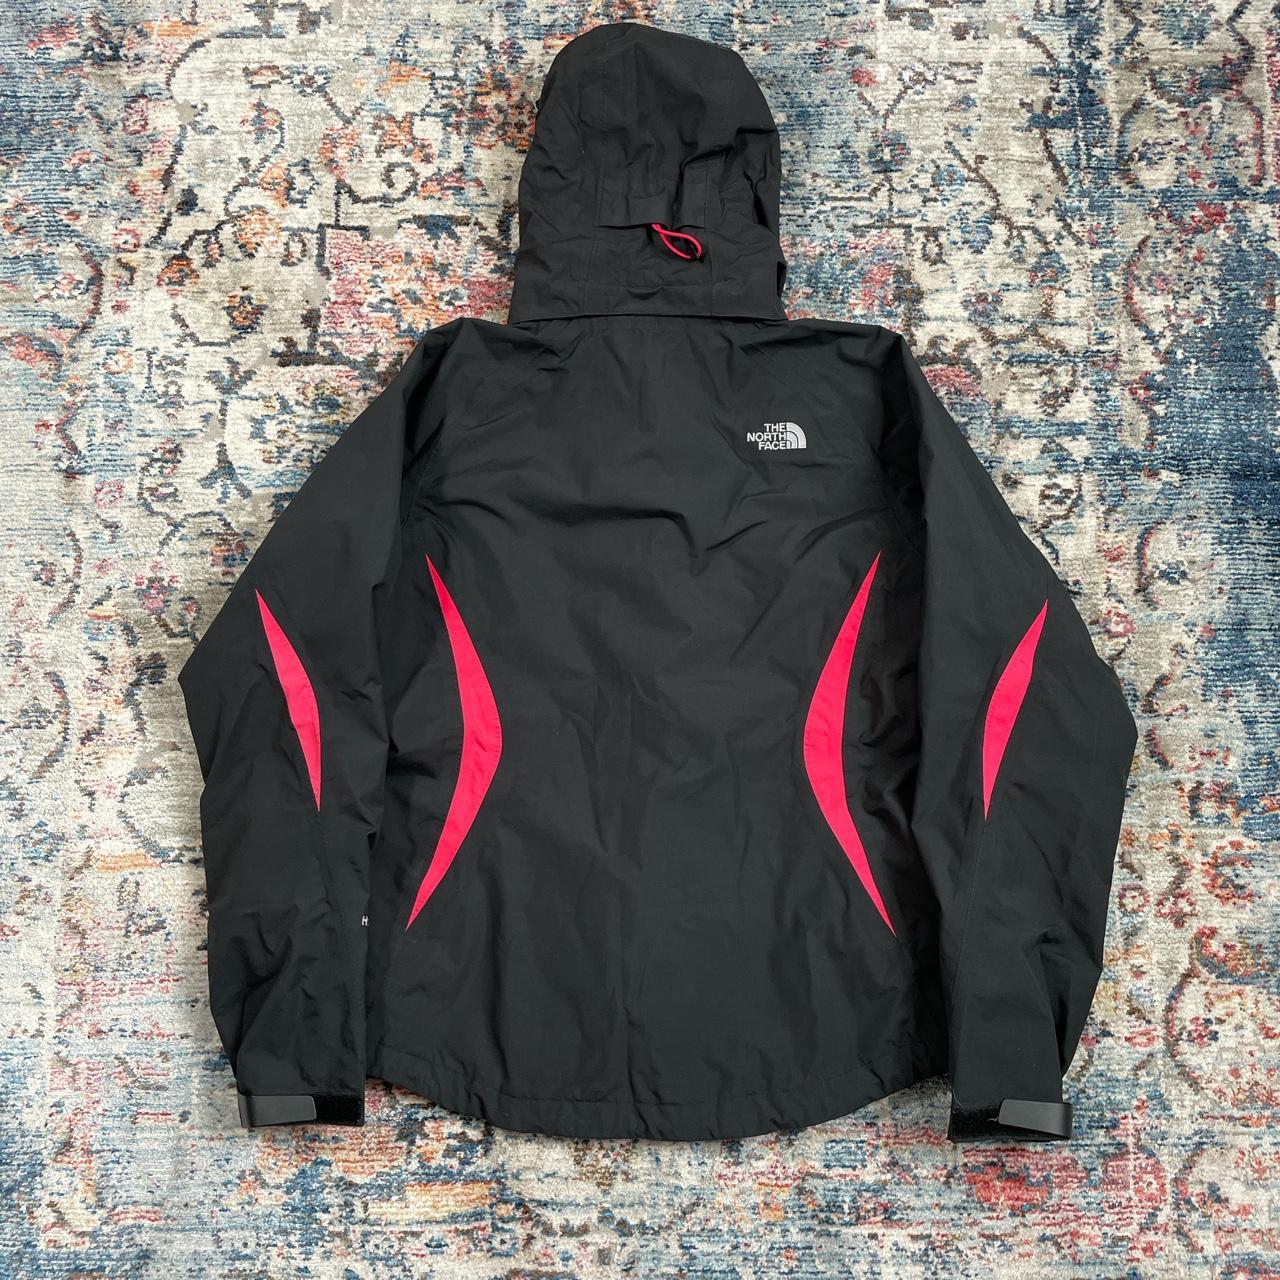 The North Face Black and Pink Jacket